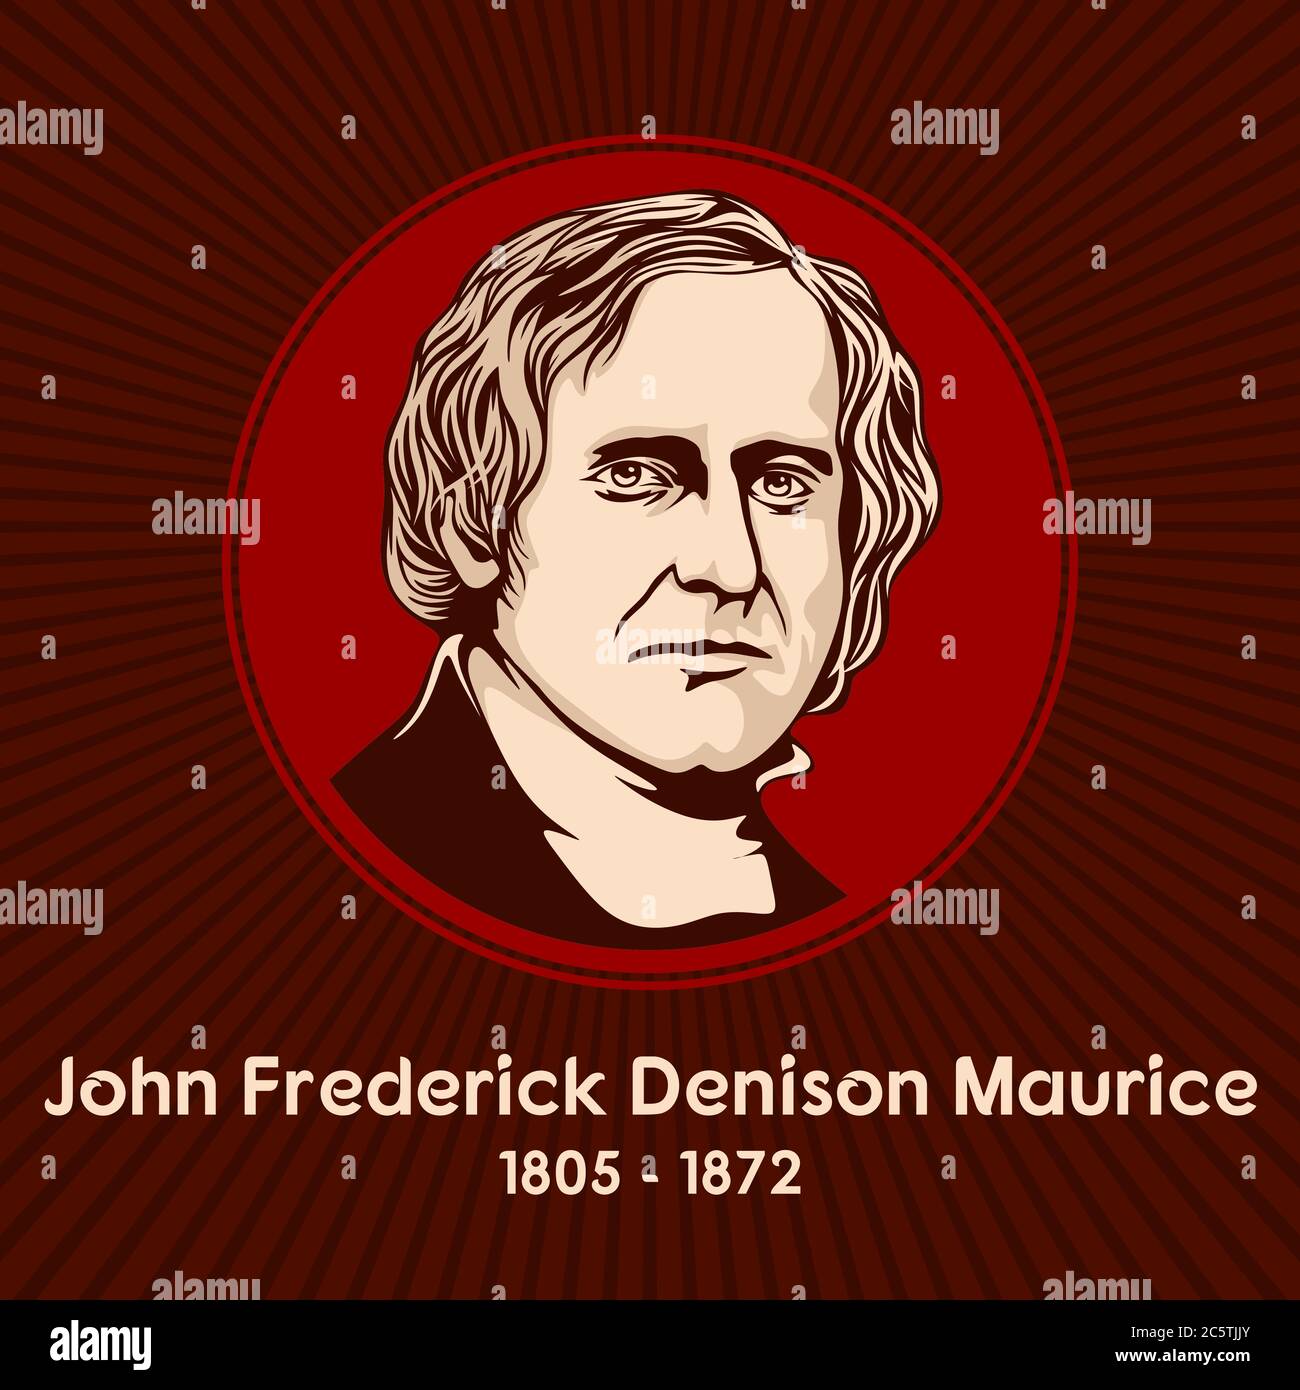 John Frederick Denison Maurice (1805 - 1872), was an English Anglican theologian, a prolific author, and one of the founders of Christian socialism. Stock Vector